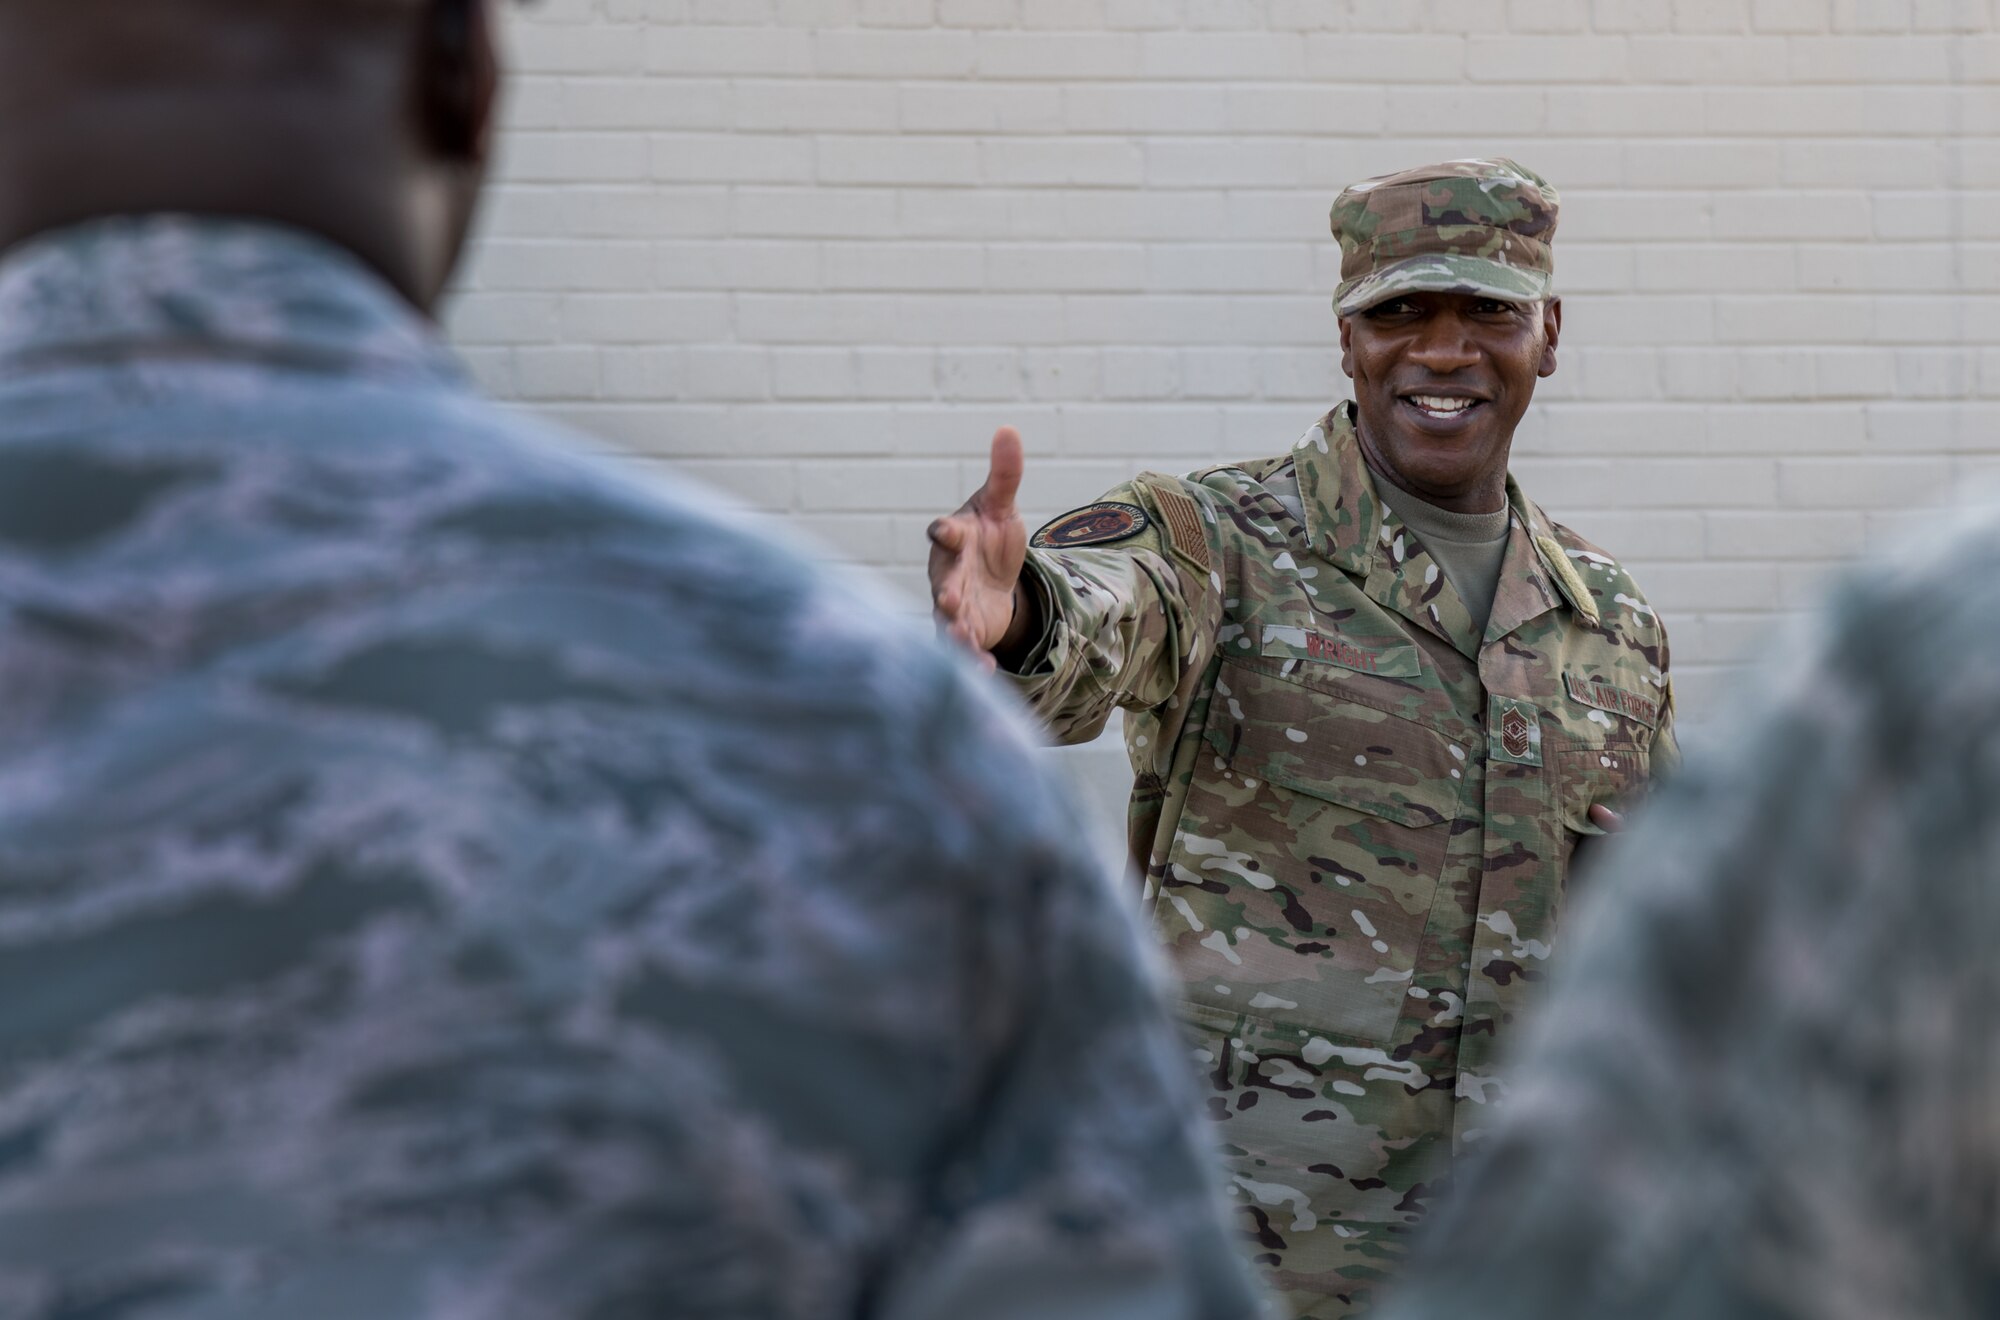 Chief Master Sgt. of the Air Force Kaleth O. Wright talks with Airmen of the 436th Medical Group Sept. 3, 2019, at Dover Air Force Base, Del. Wright shared stories and provided top-level support to Dover Airmen for their continued excellence. (U.S. Air Force photo by Roland Balik)